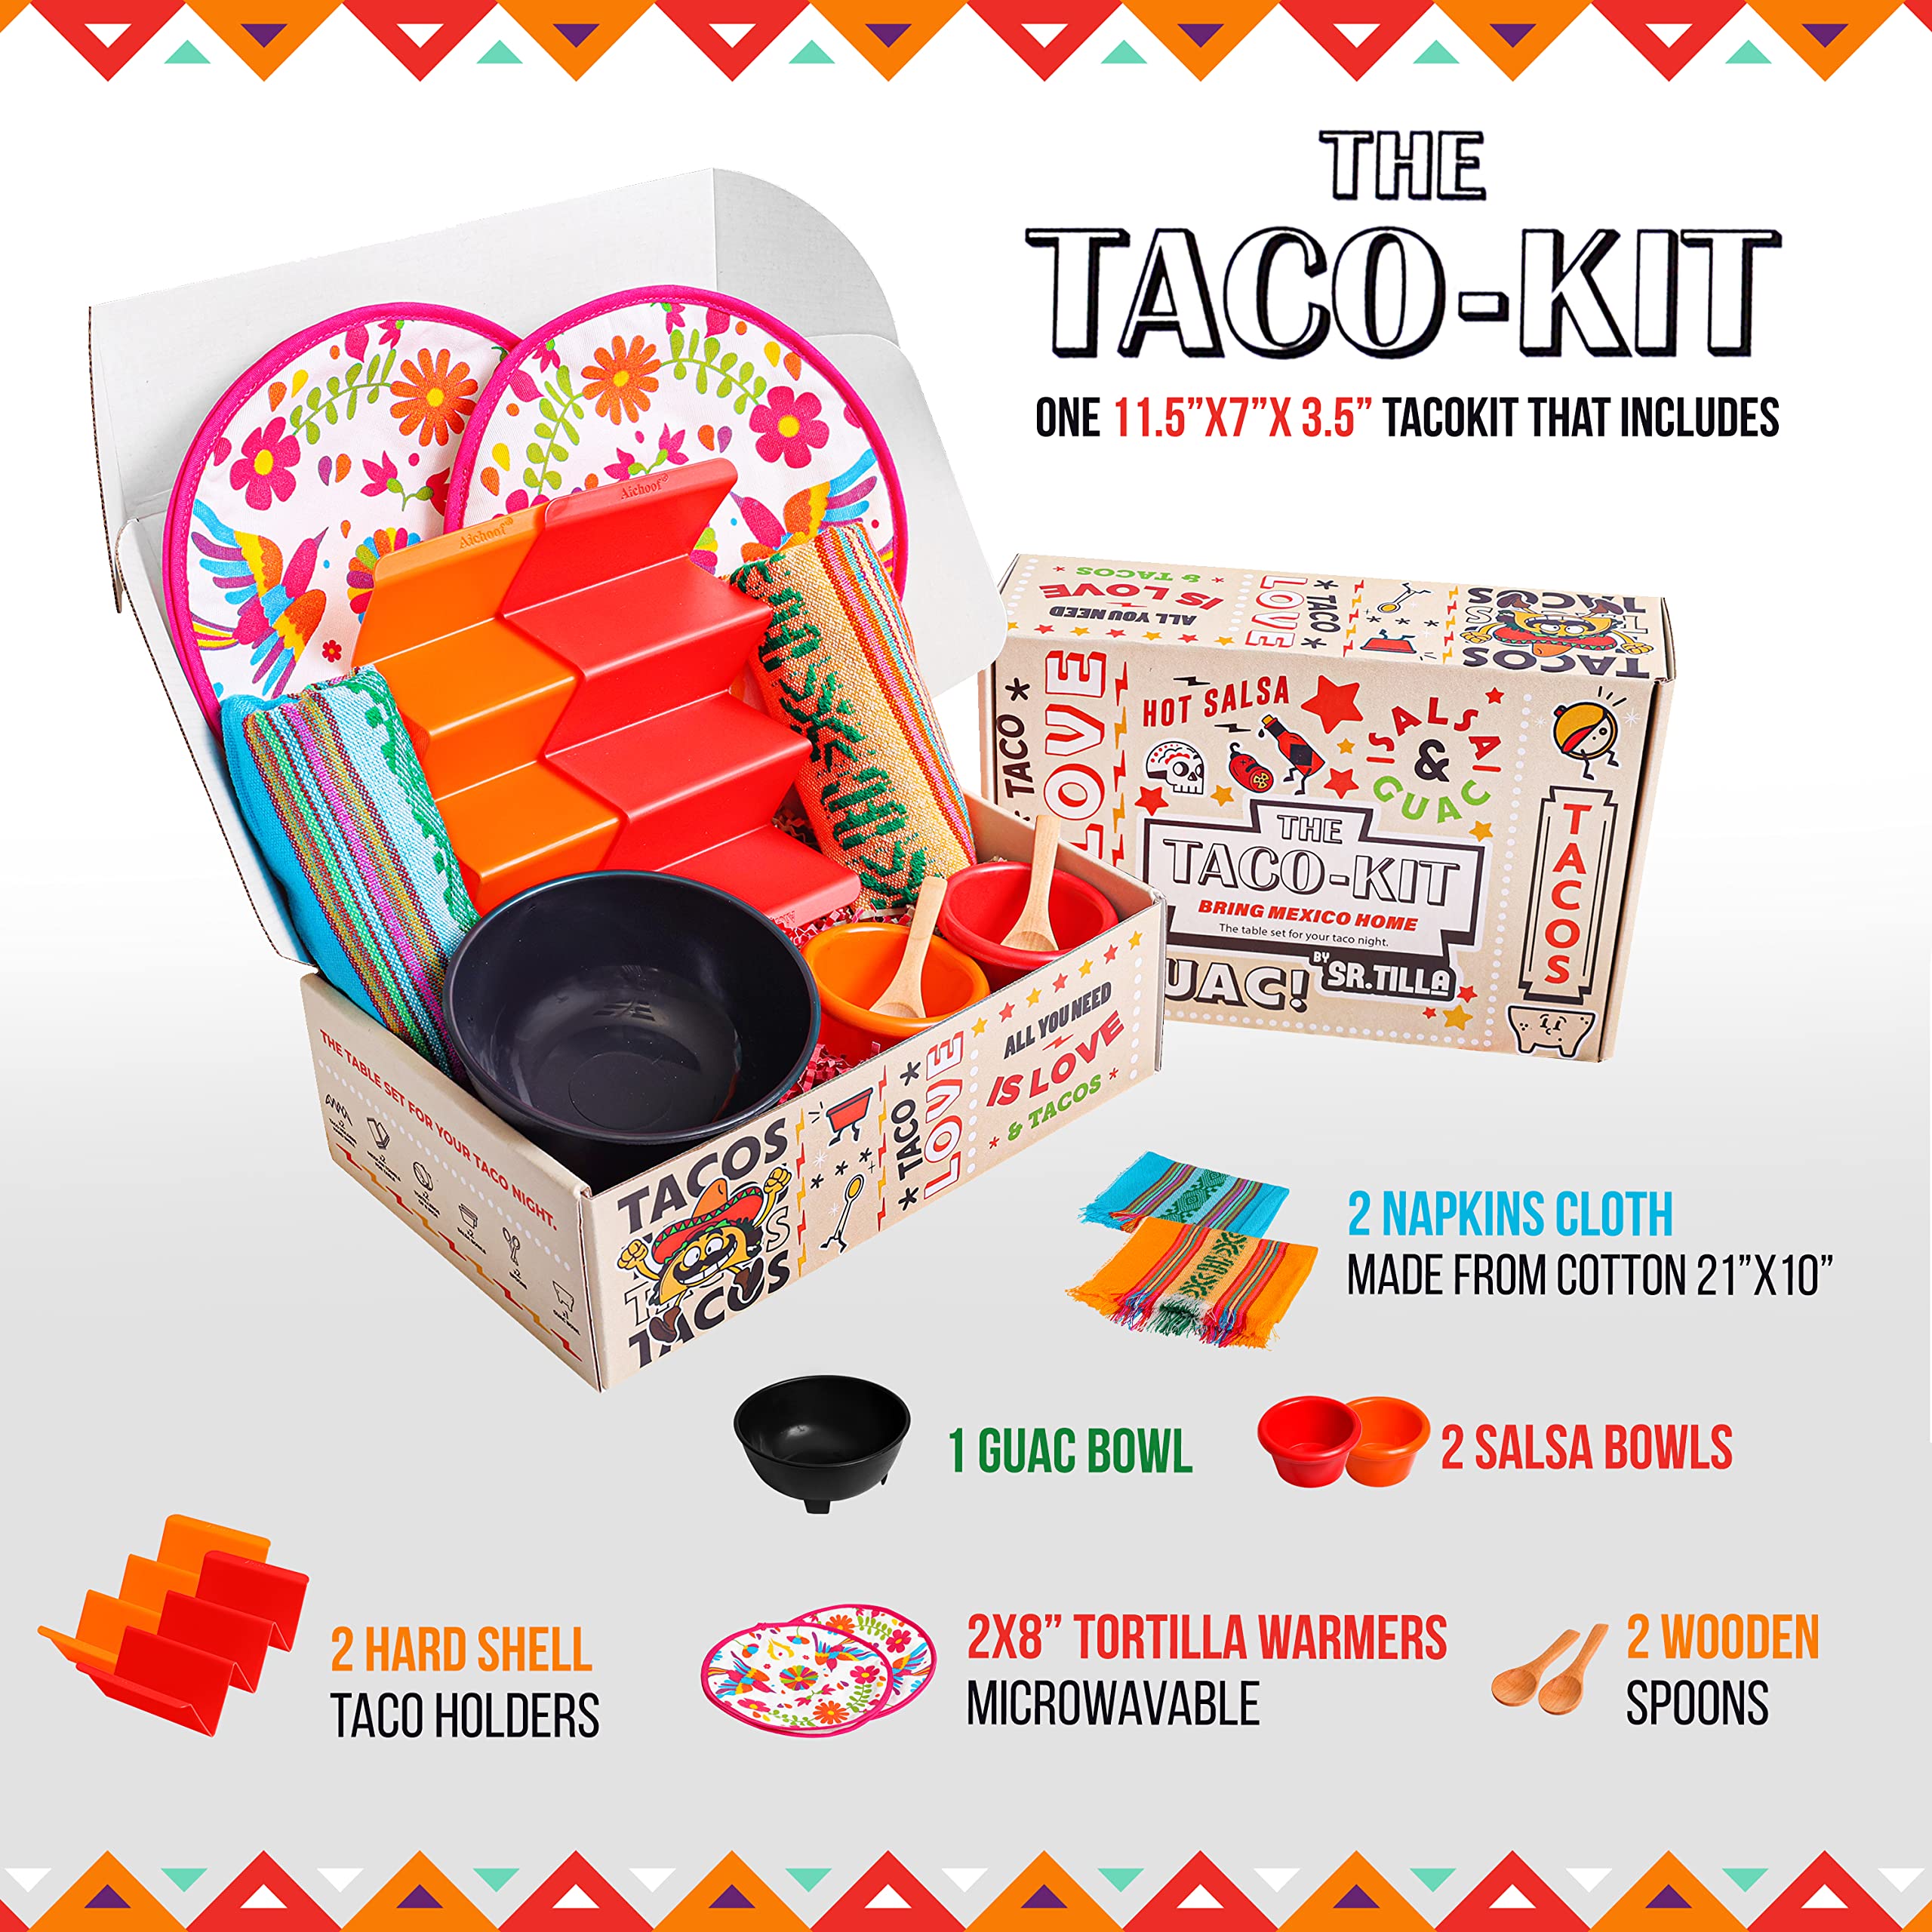 Taco Tuesday Box,The Taco kit table Set of 11 items for your Taco Tuesday,tortilla warmers, Taco Holders, Salsa Bowls, all you need to setup your taco night table for 2 persons in one Box